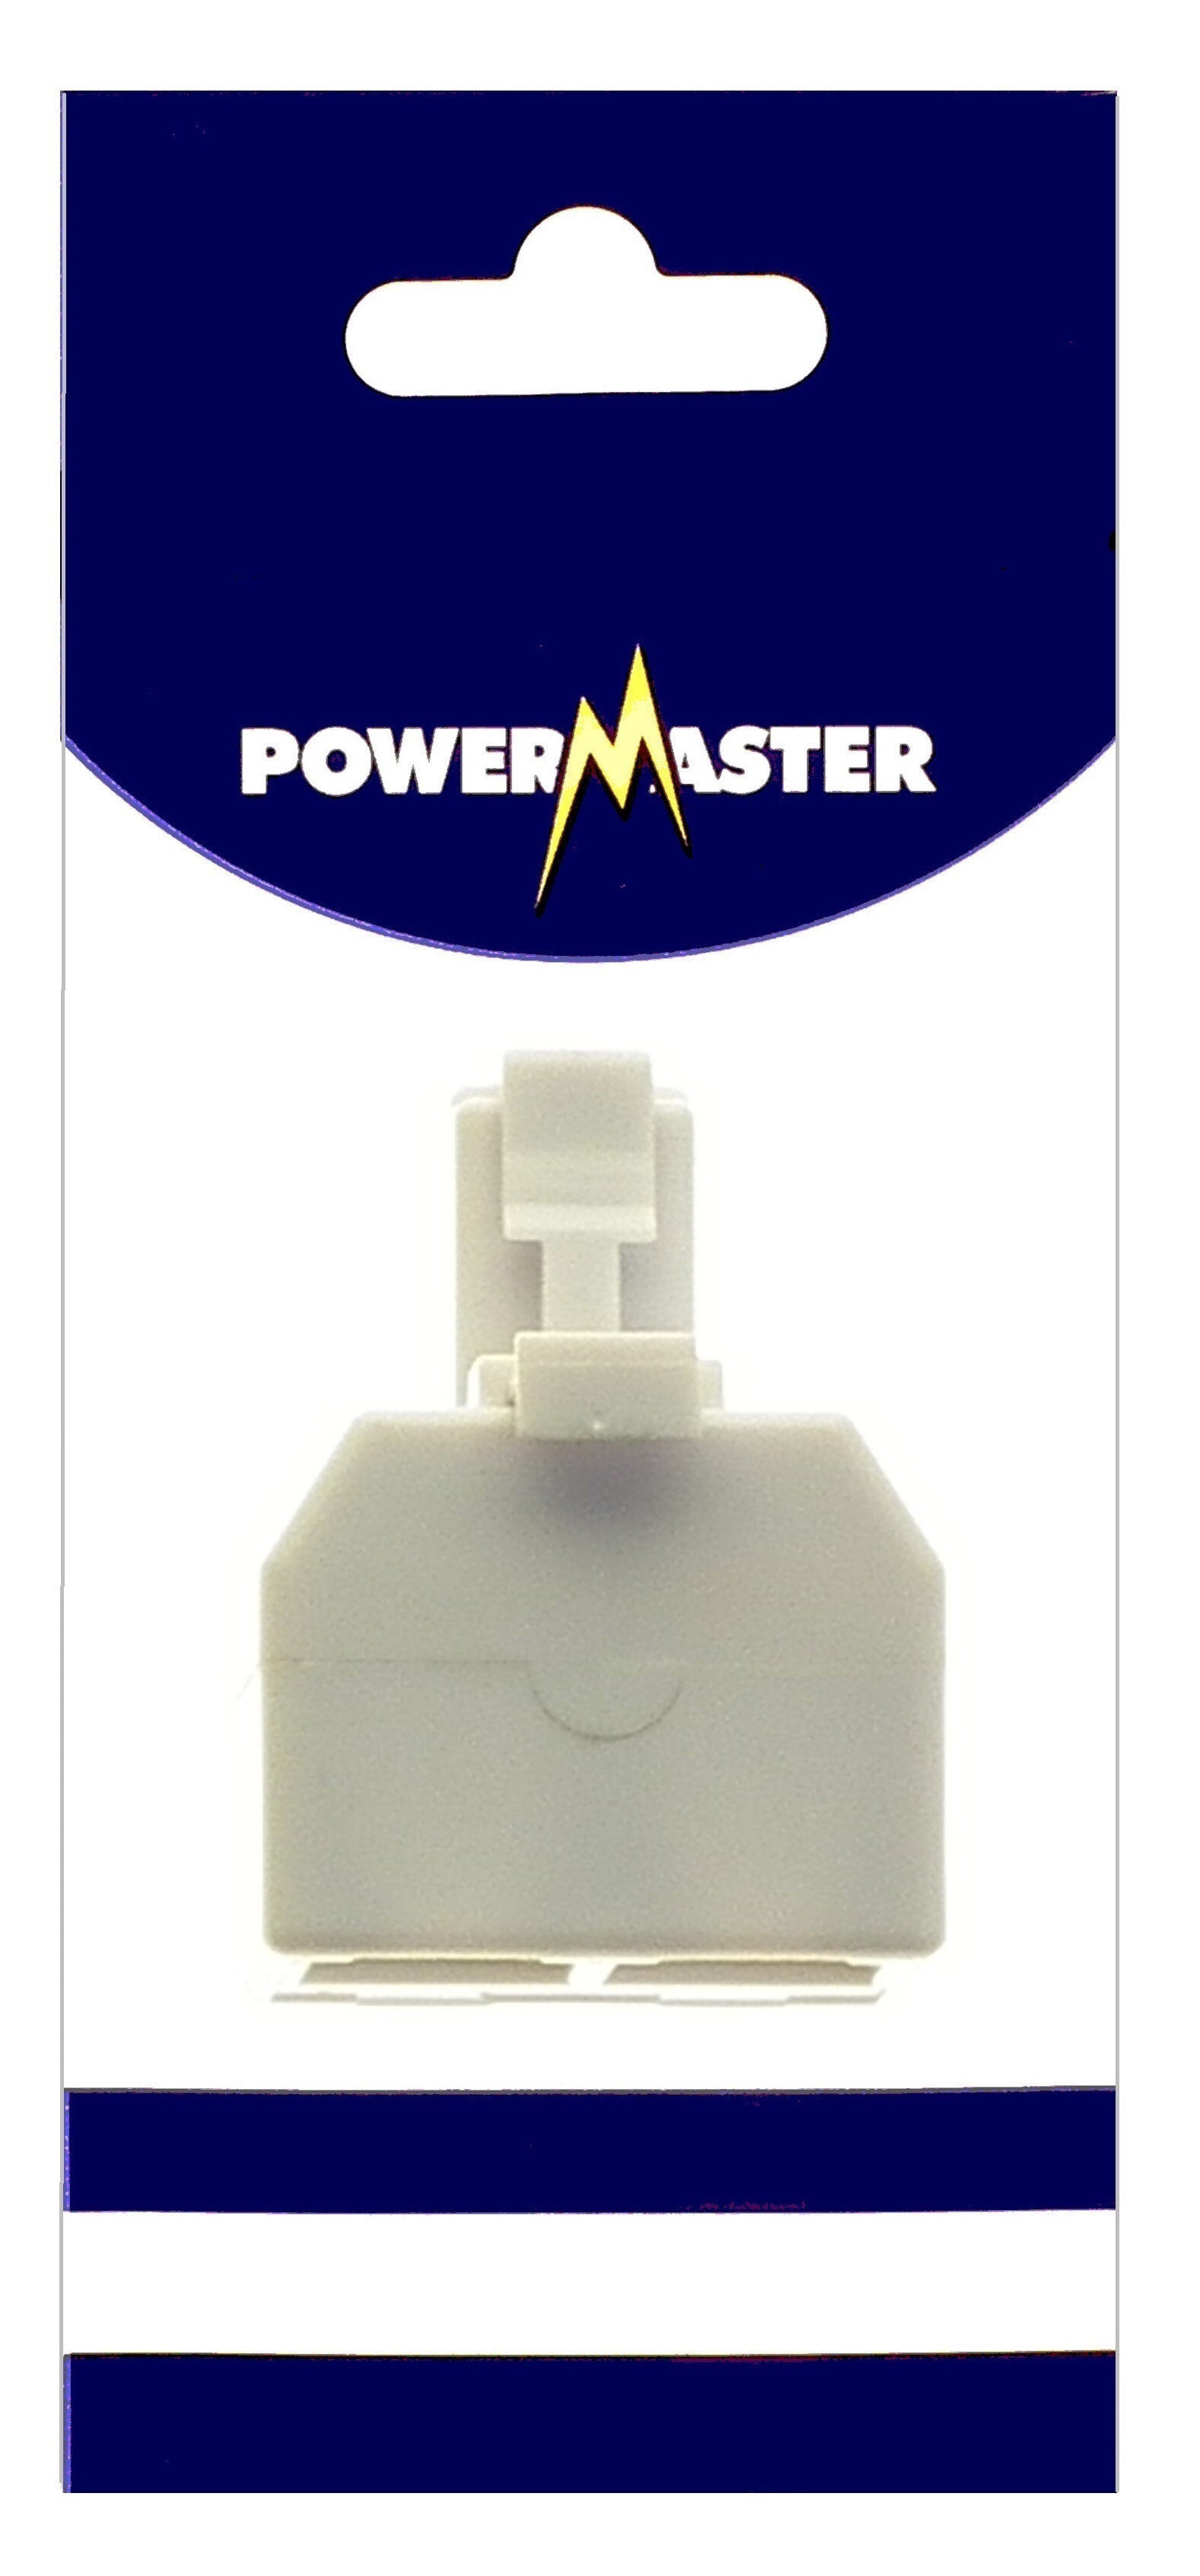 Electrical Accessories| Powermaster Phone Splitter 2W by Weirs of Baggot St